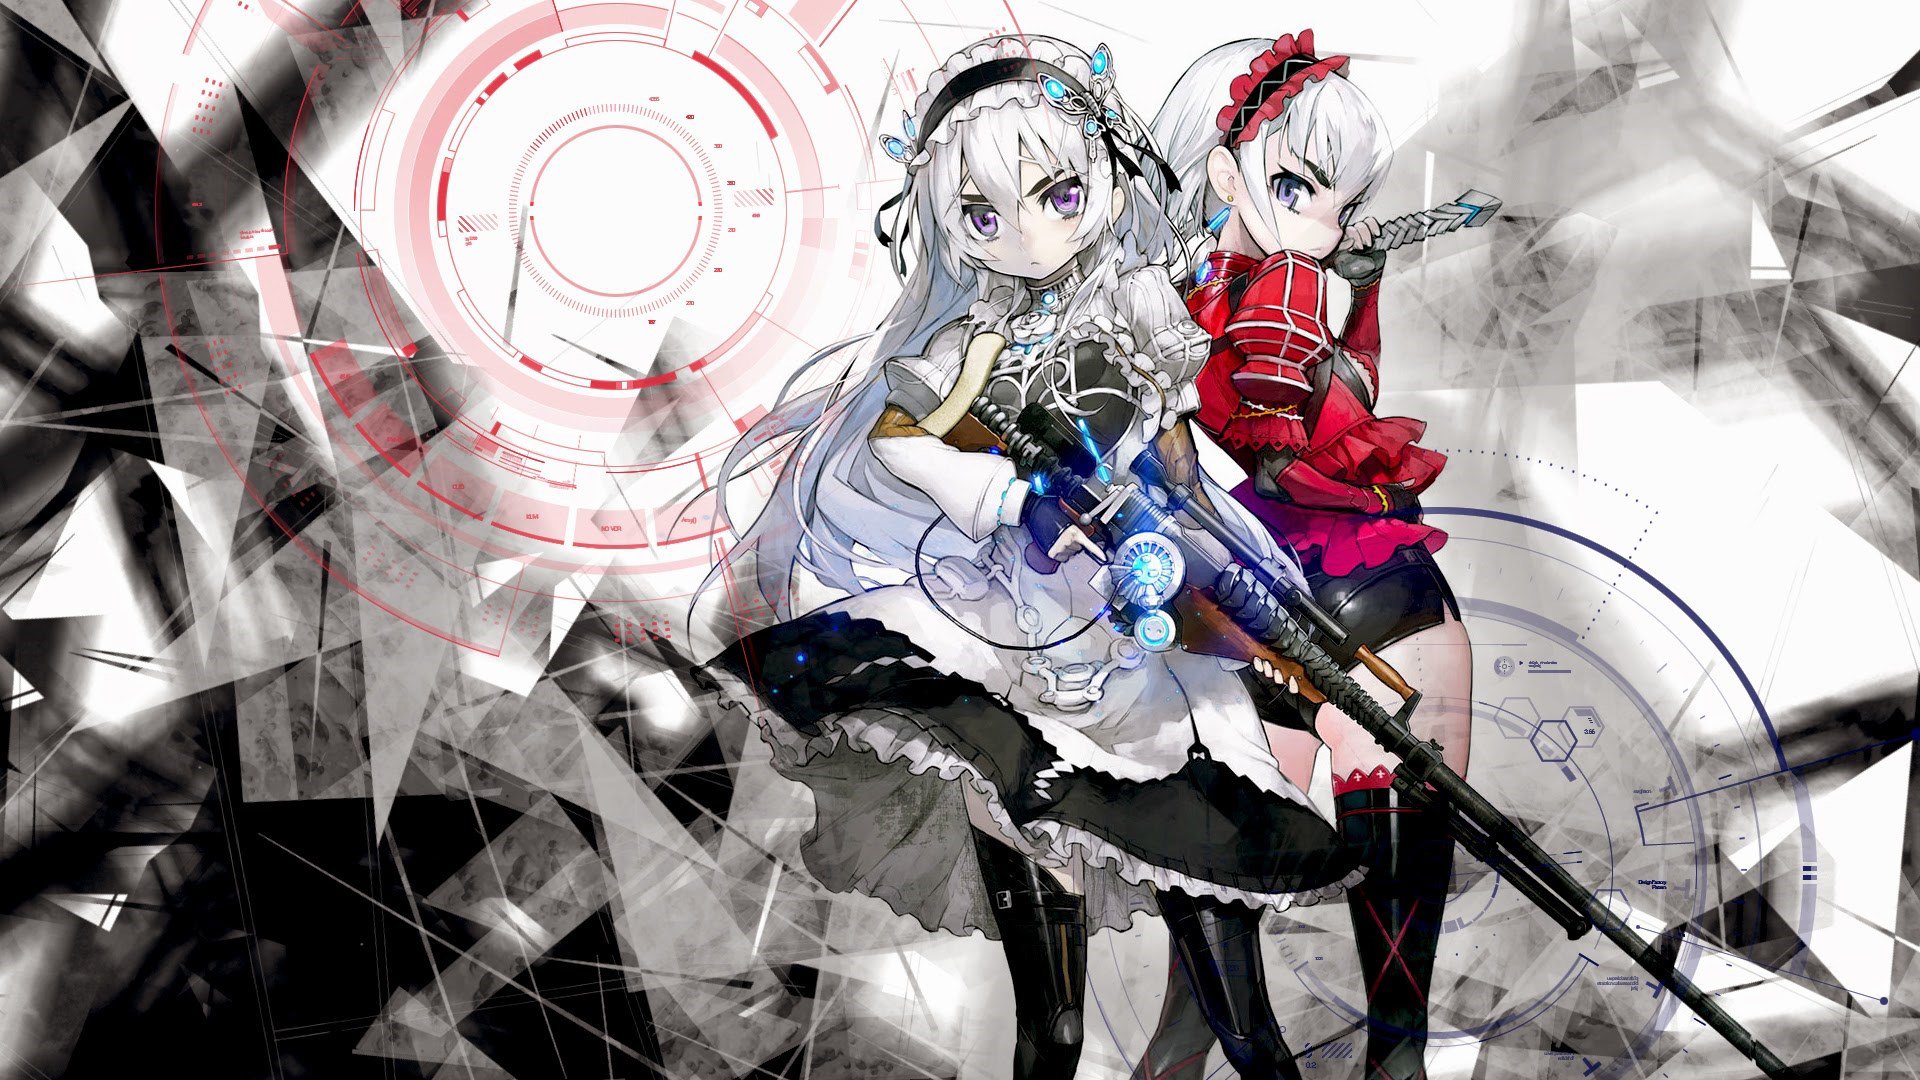 30+ Chaika -The Coffin Princess- HD Wallpapers and Backgrounds